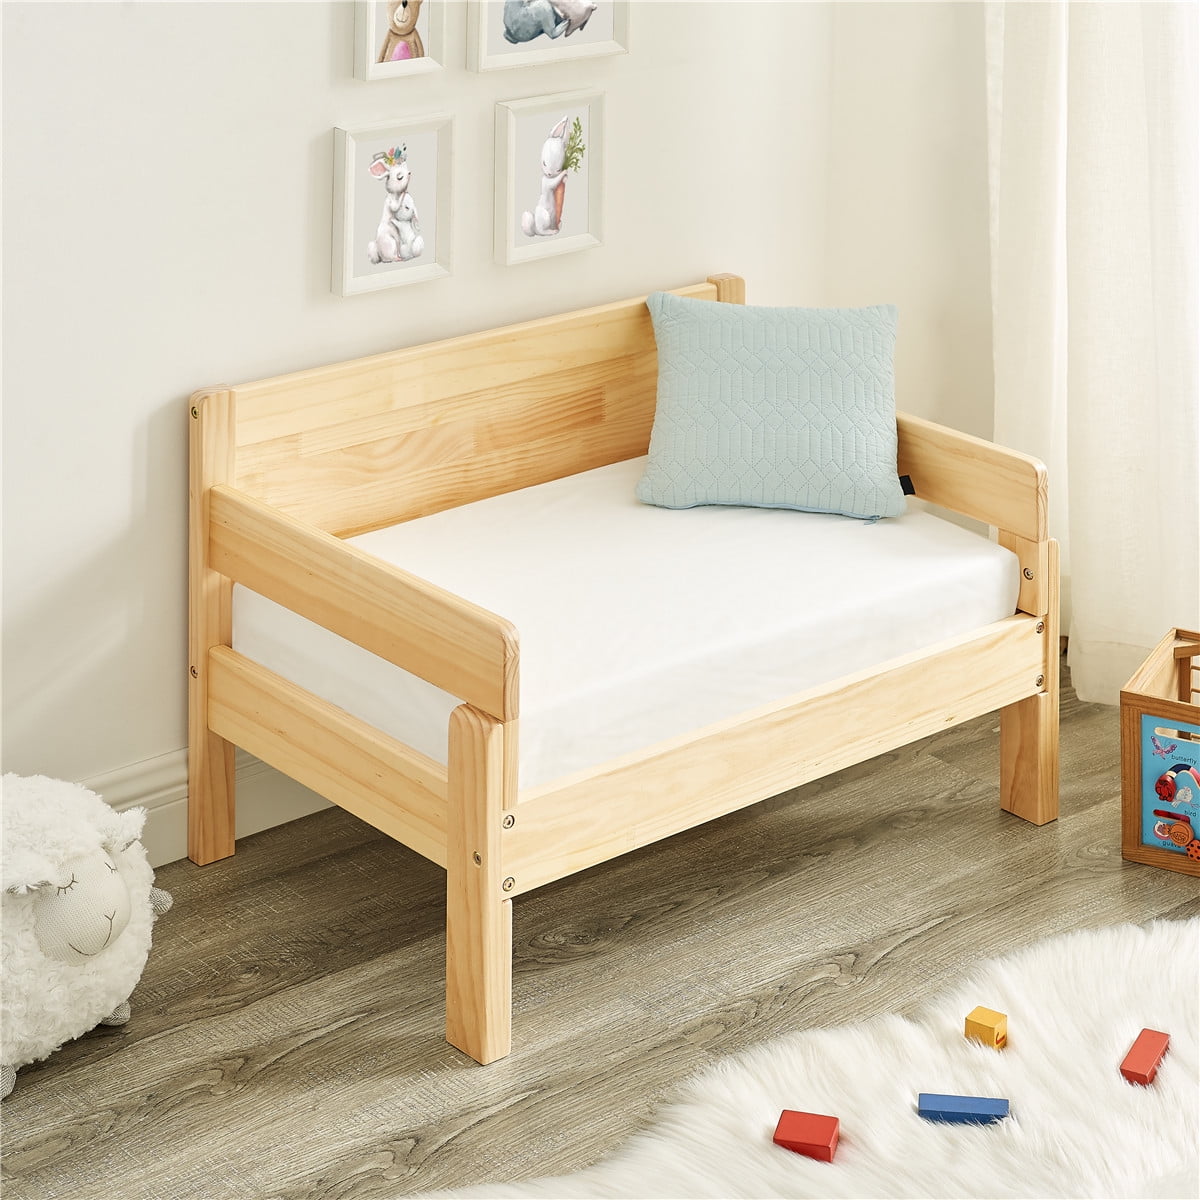 Children Bed Frame Convert to one Chair/Sofa Mattress not Included MUSEHOMEINC 2 in 1 Convertible Toddler Bed,Multifunctional Solid Wood Kids Bed w/ 2 Side Guardrails Fits Standard Crib Mattress, 